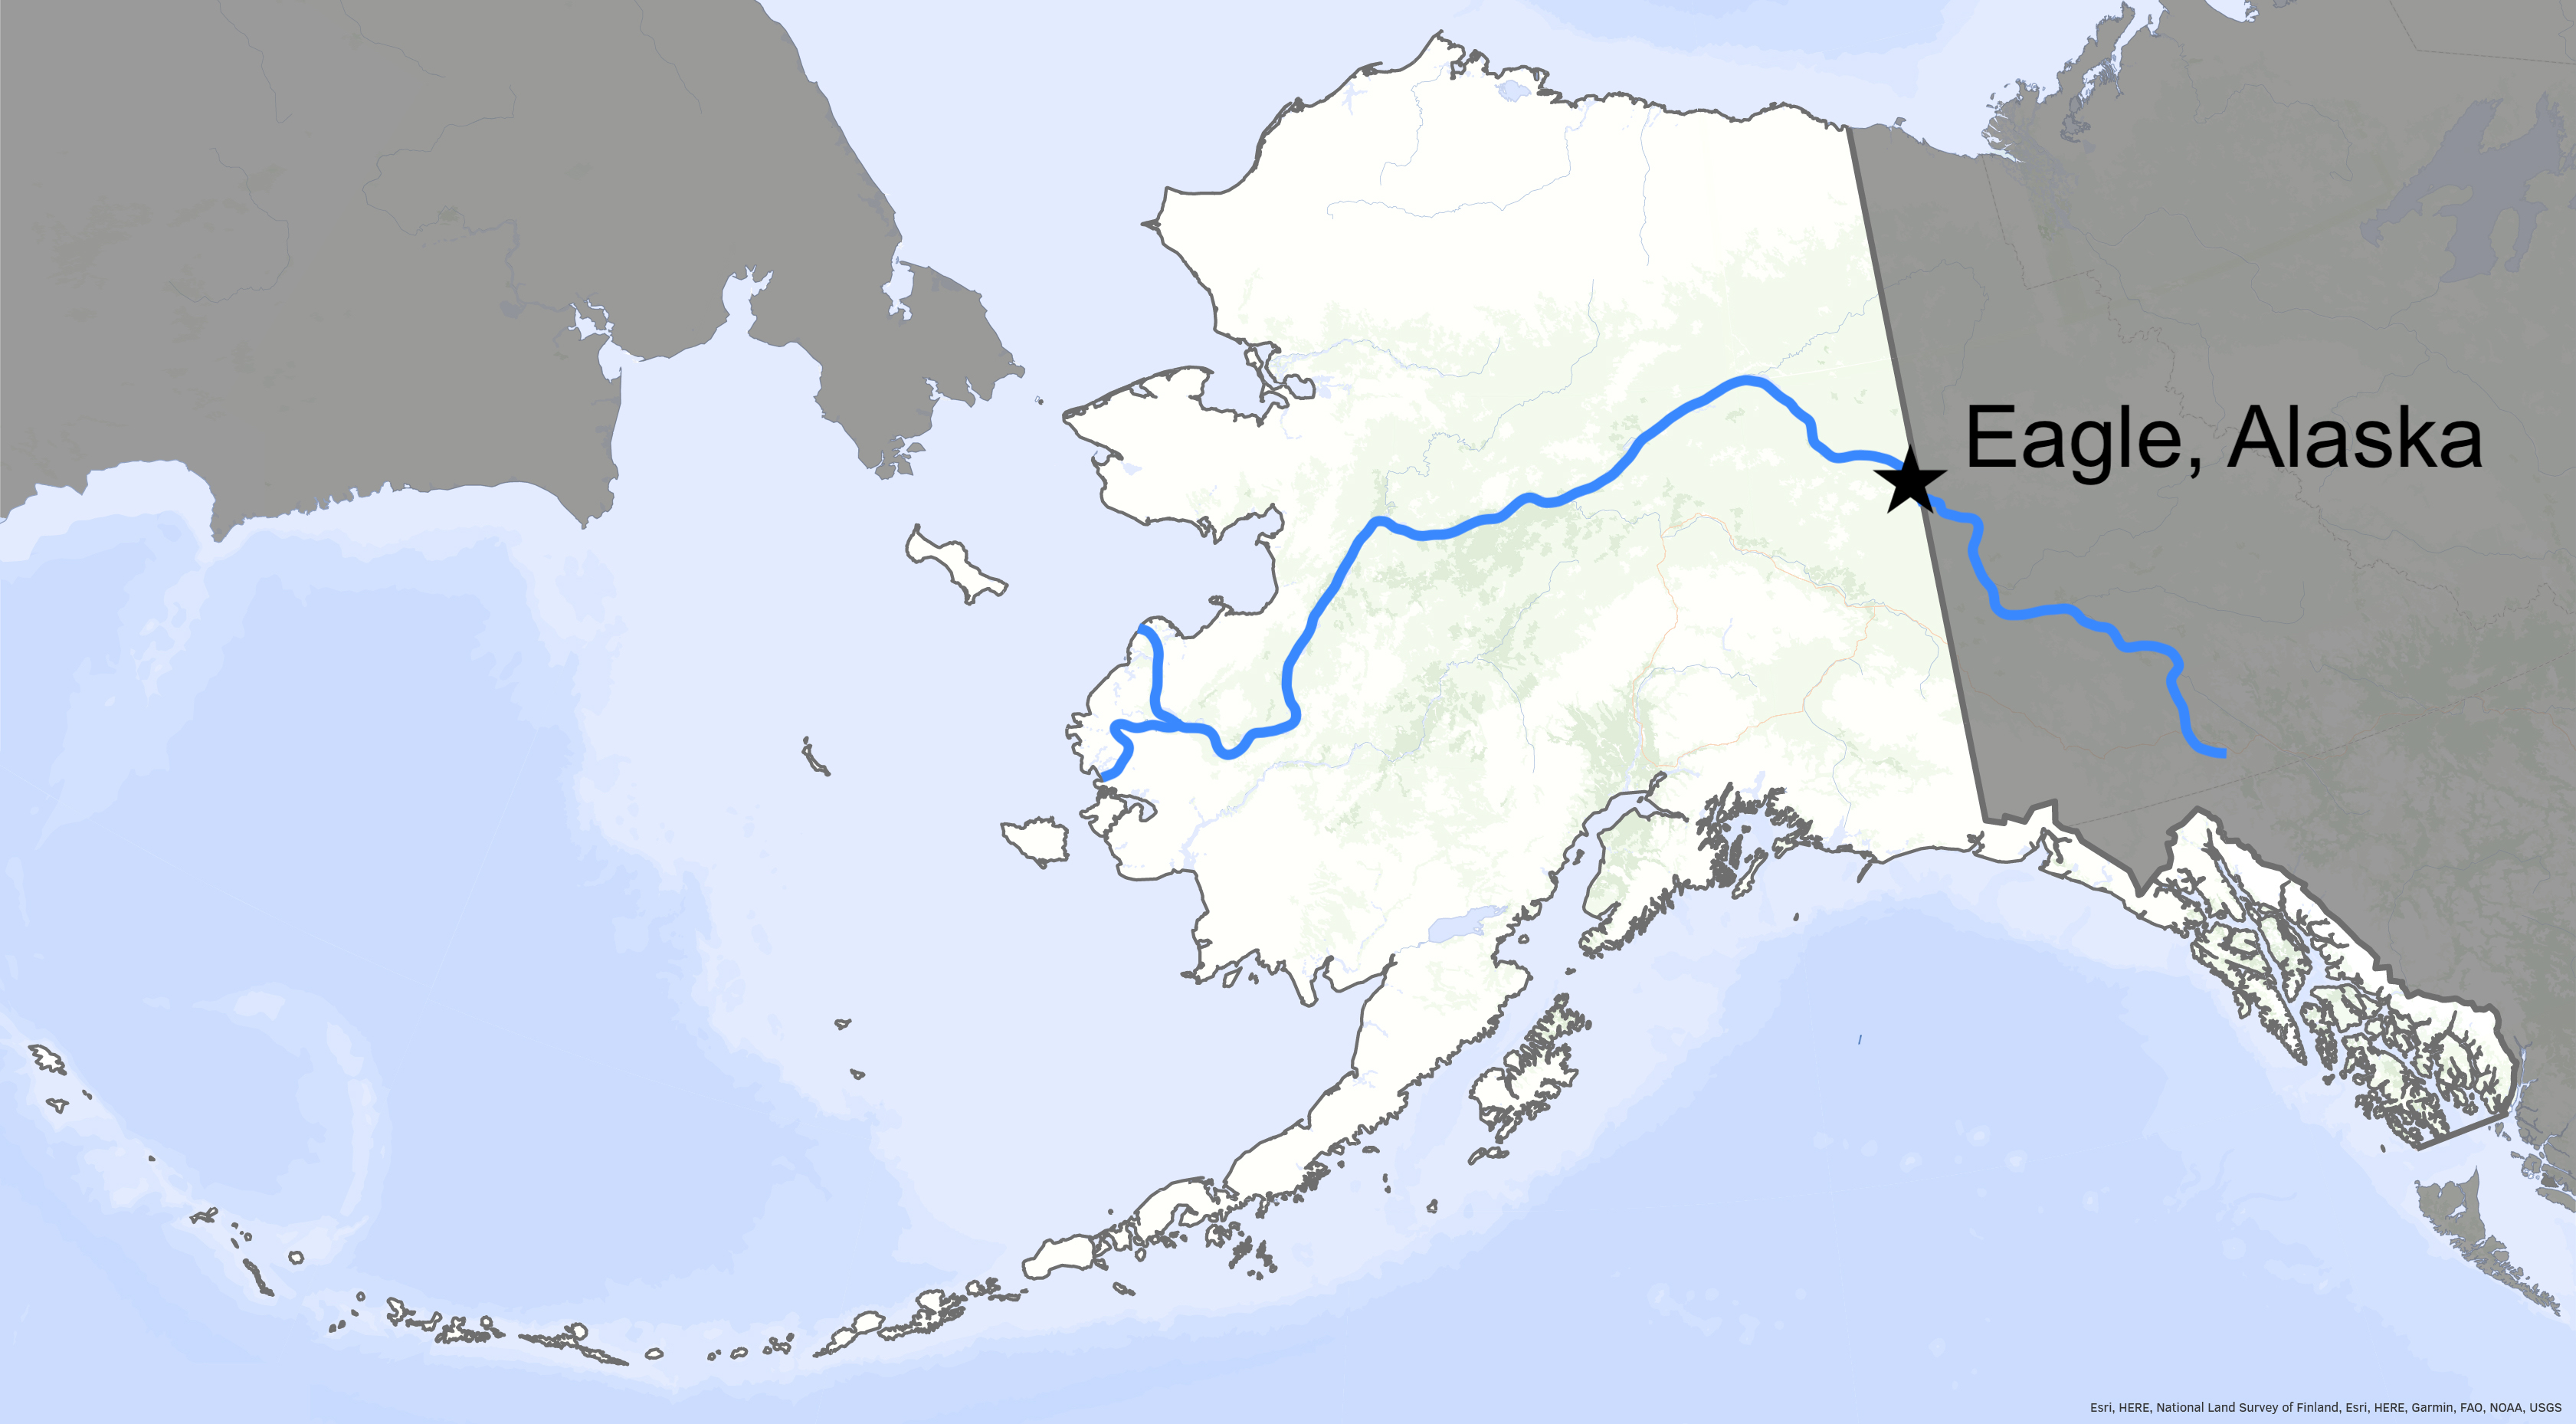 A map shows the location of Eagle, Alaska.